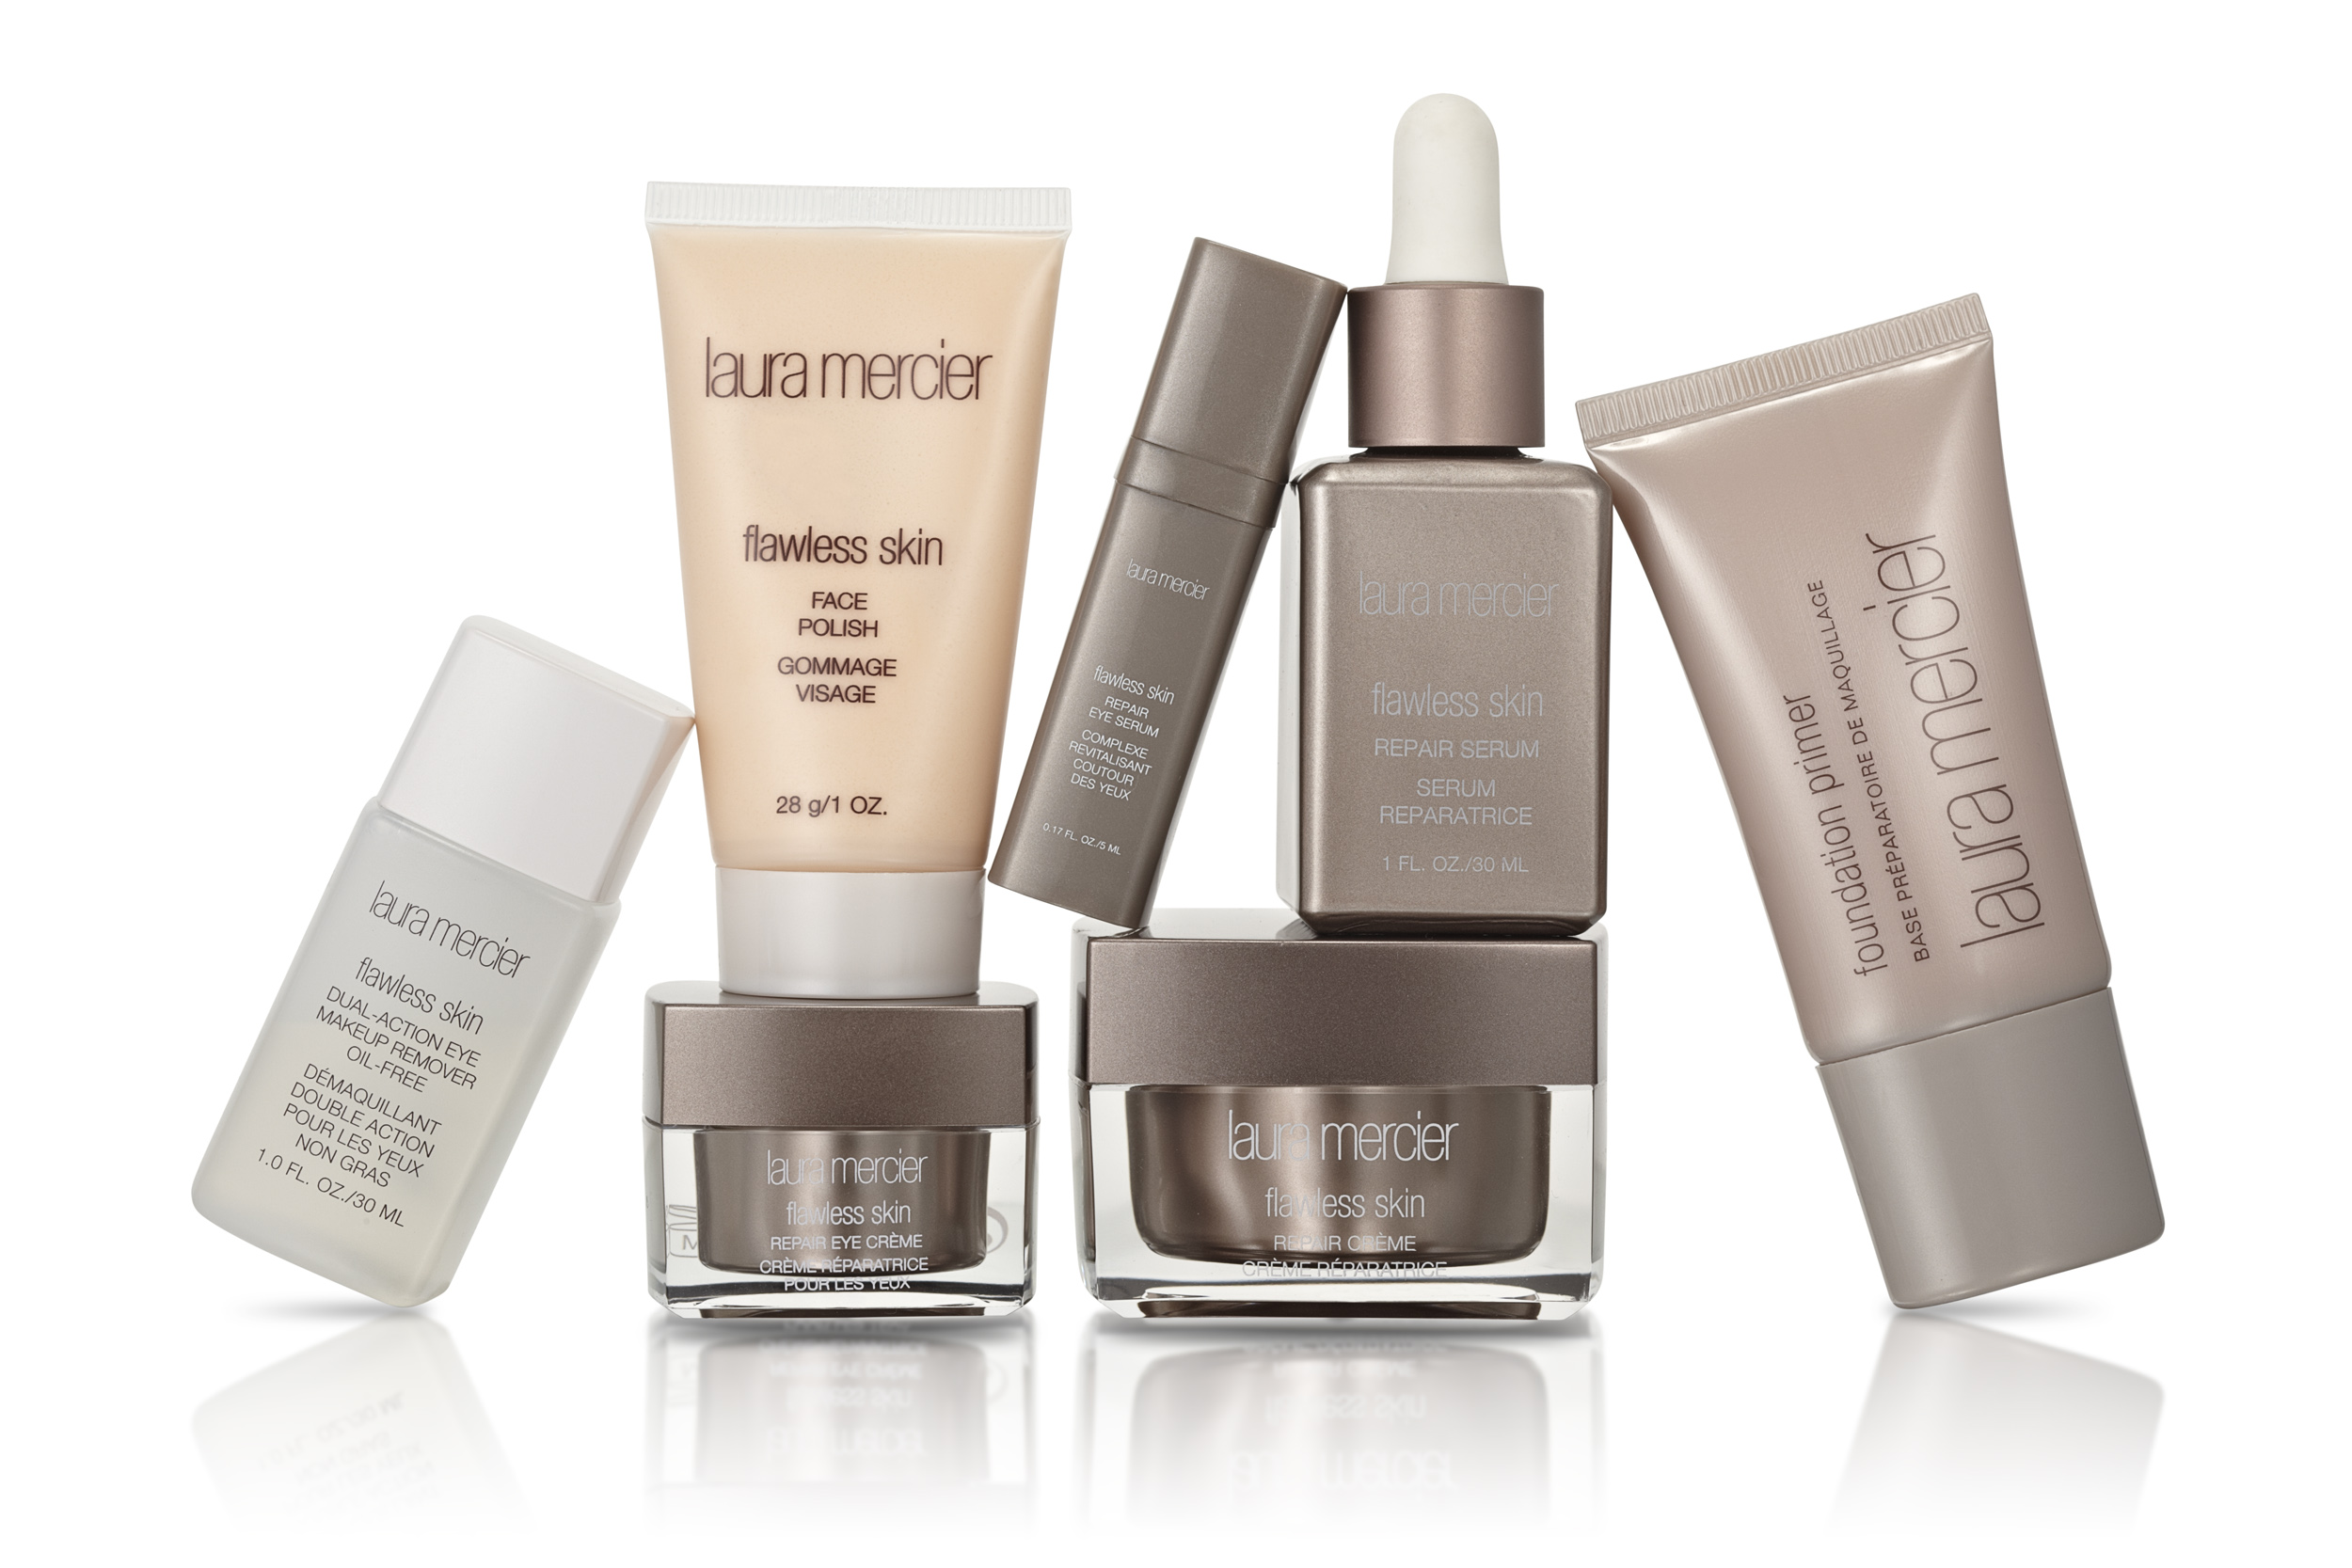 e-commerce product photograph of seven skin care products including serums, cremes, and foundation in a dynamic group composition on white with a reflection